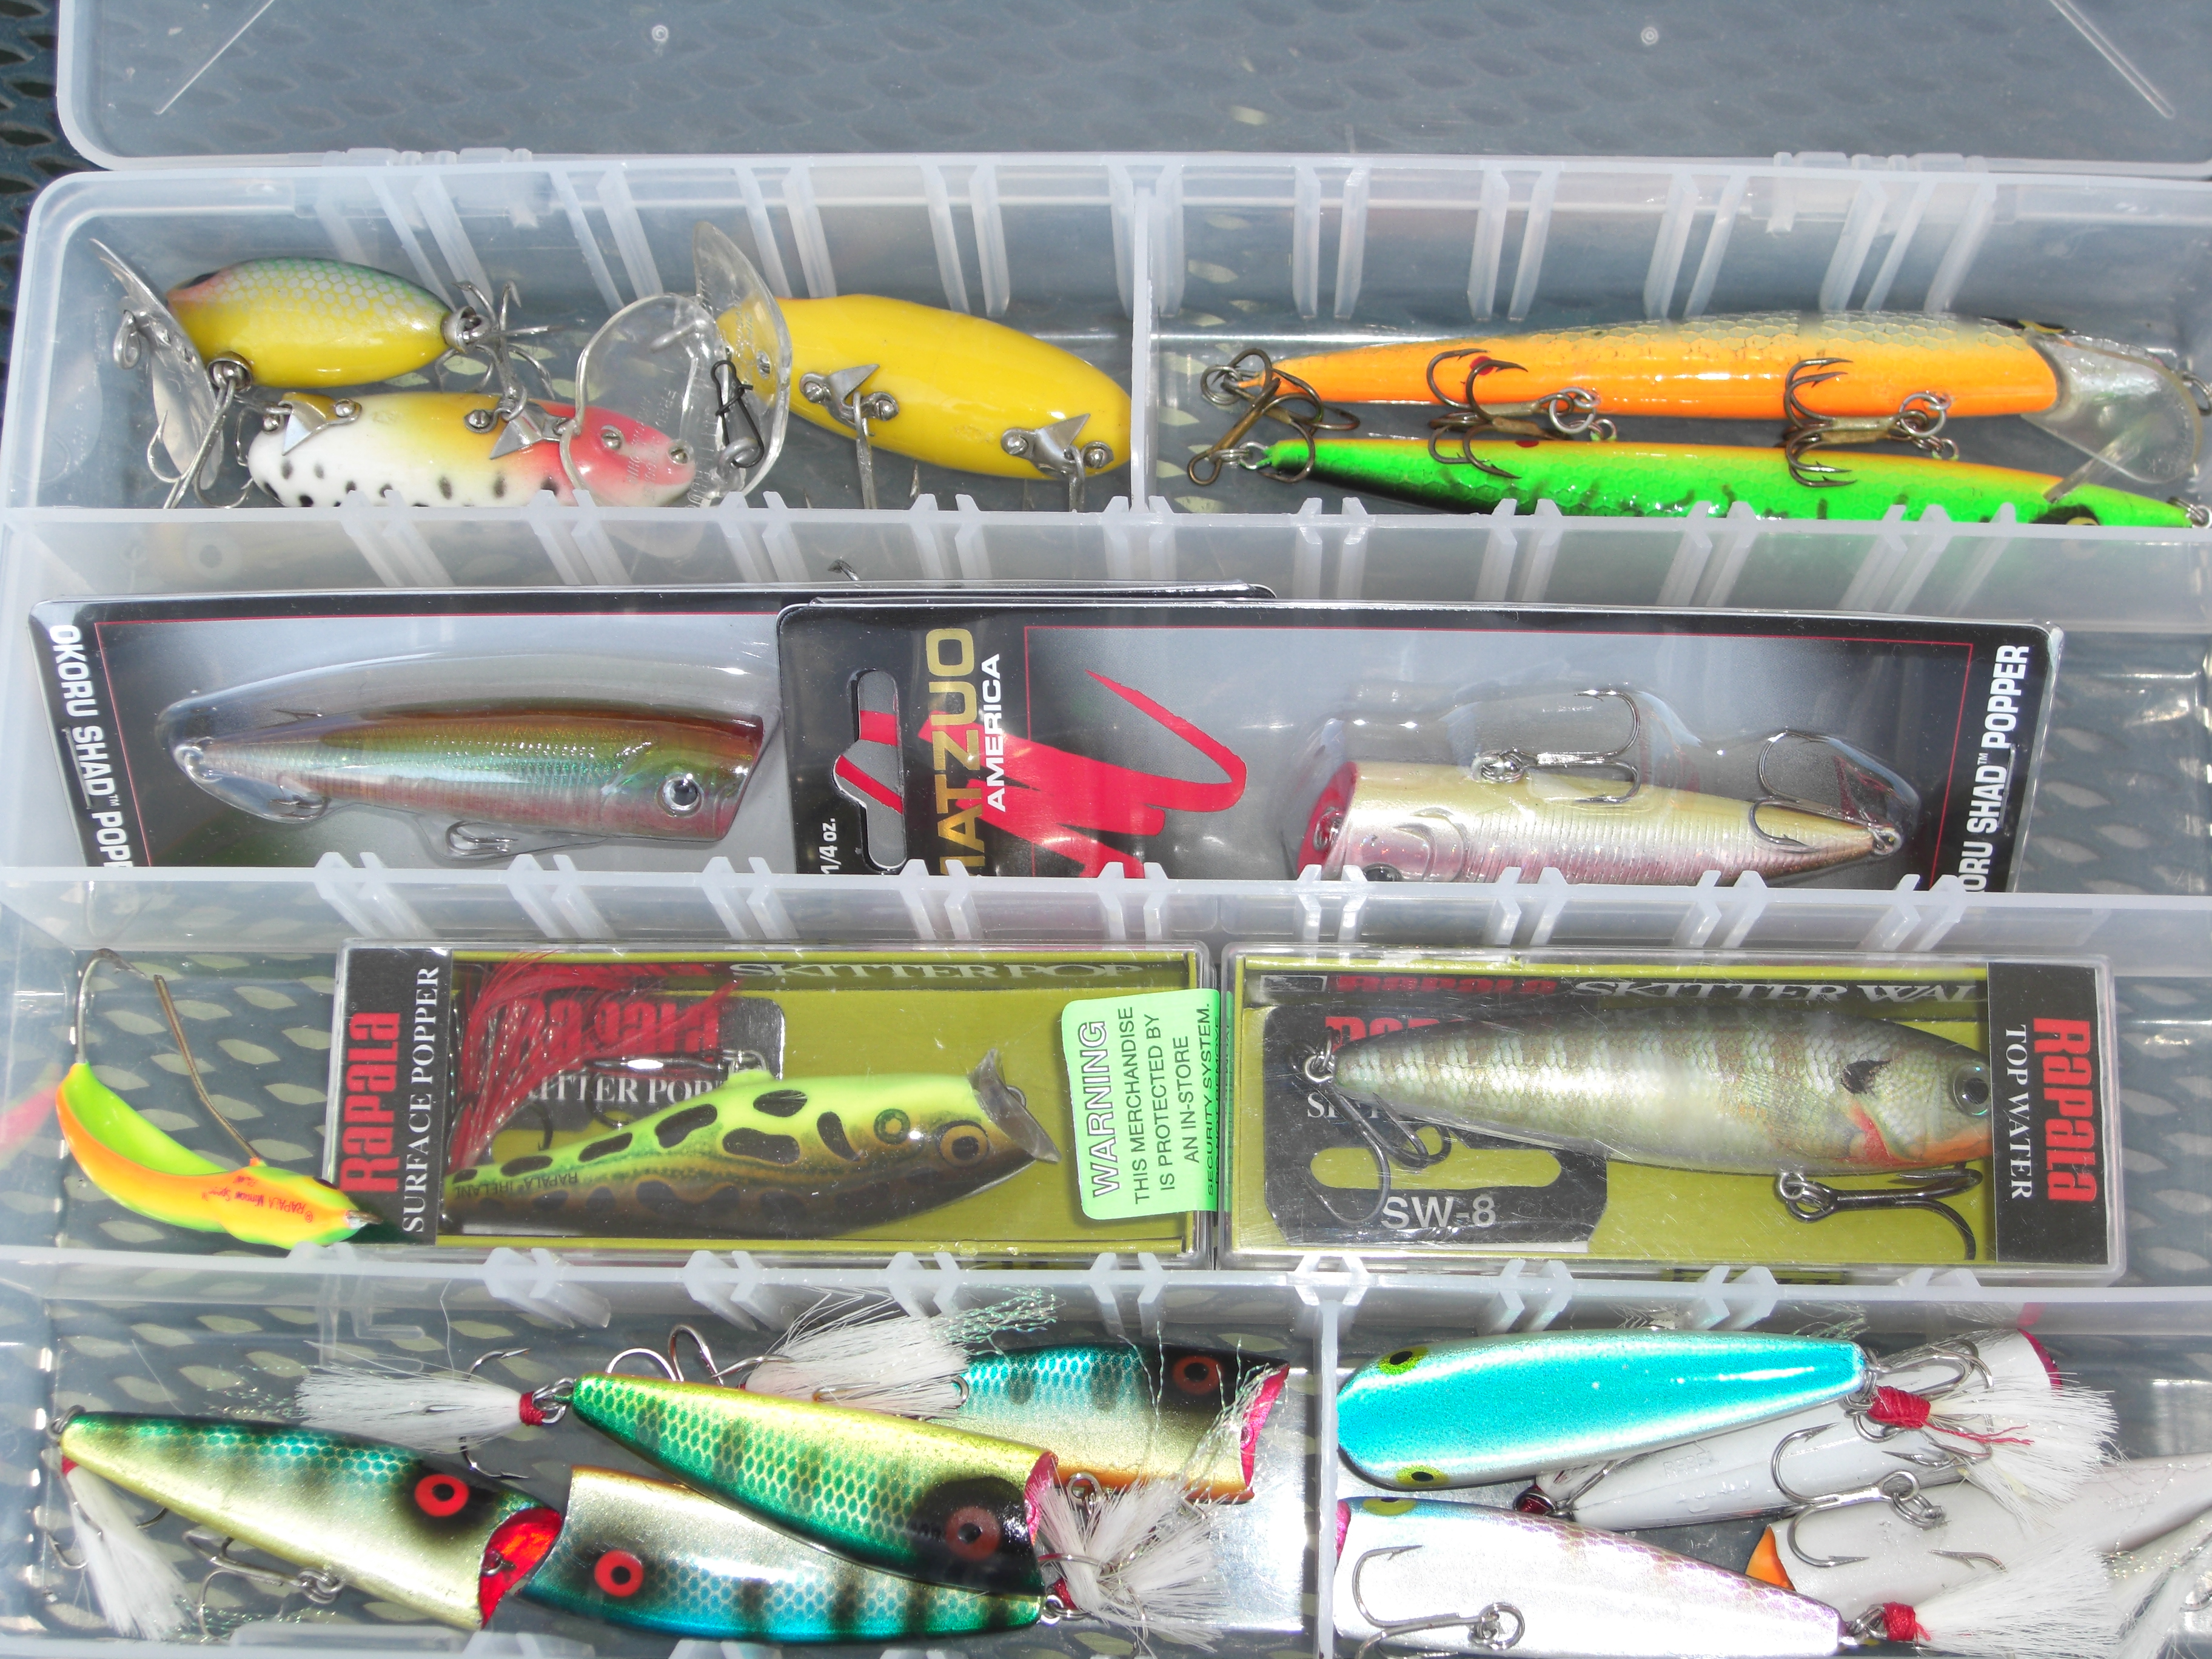 Artificial Lures Can Provide Many Memories if Fished Properly